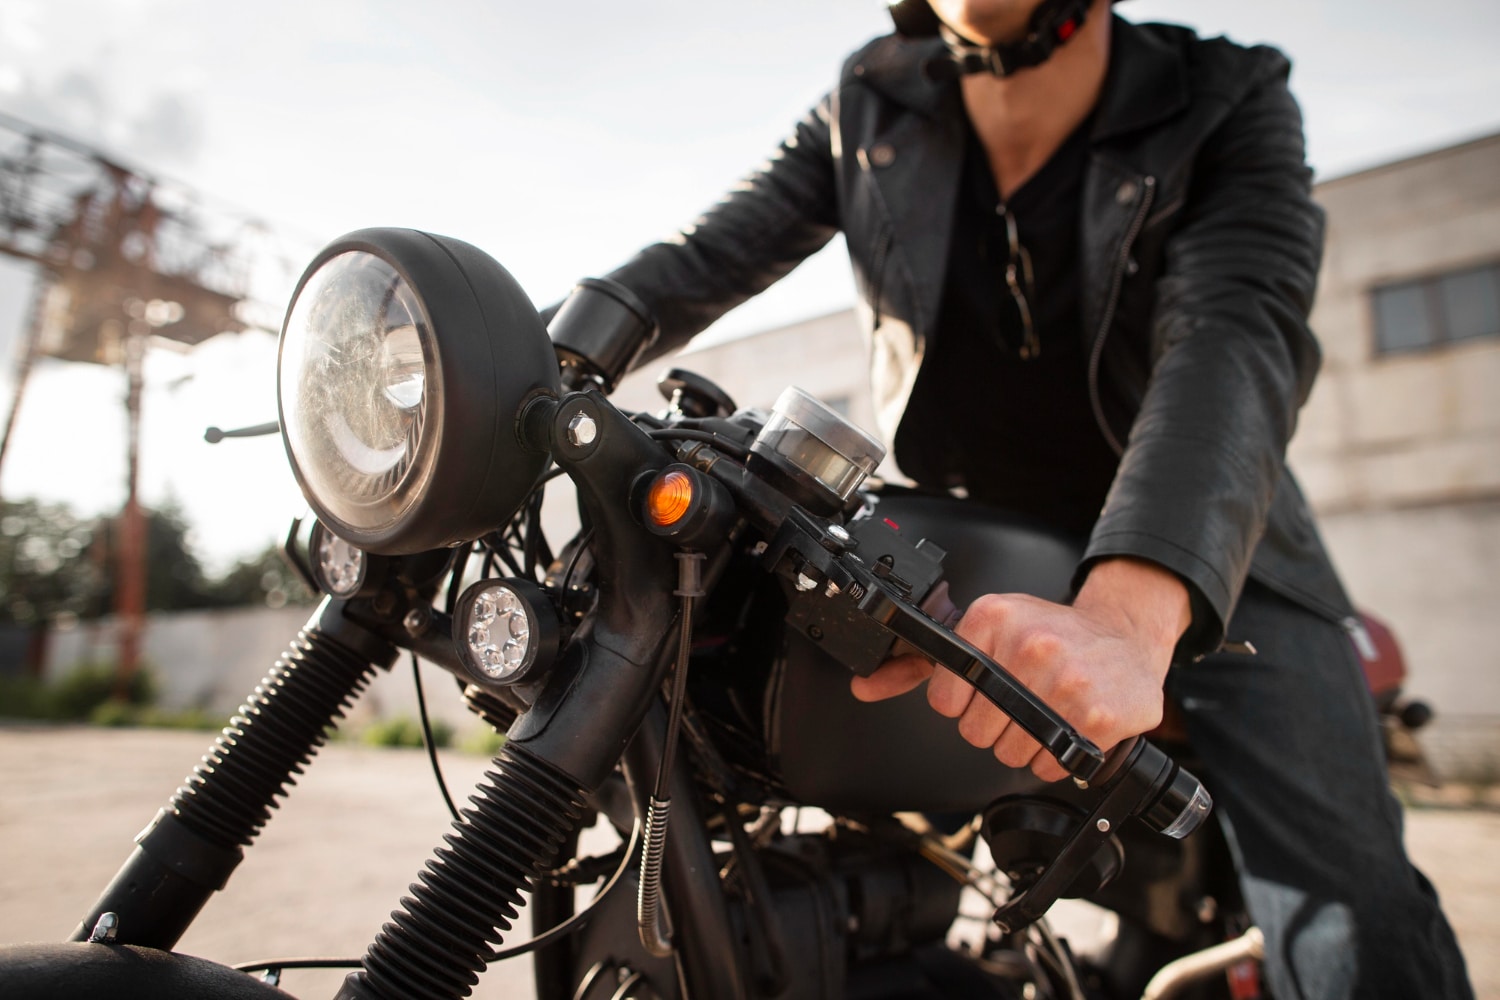 You are currently viewing RevZilla Gear Up for the Ride: Motorcycle Apparel and Accessories